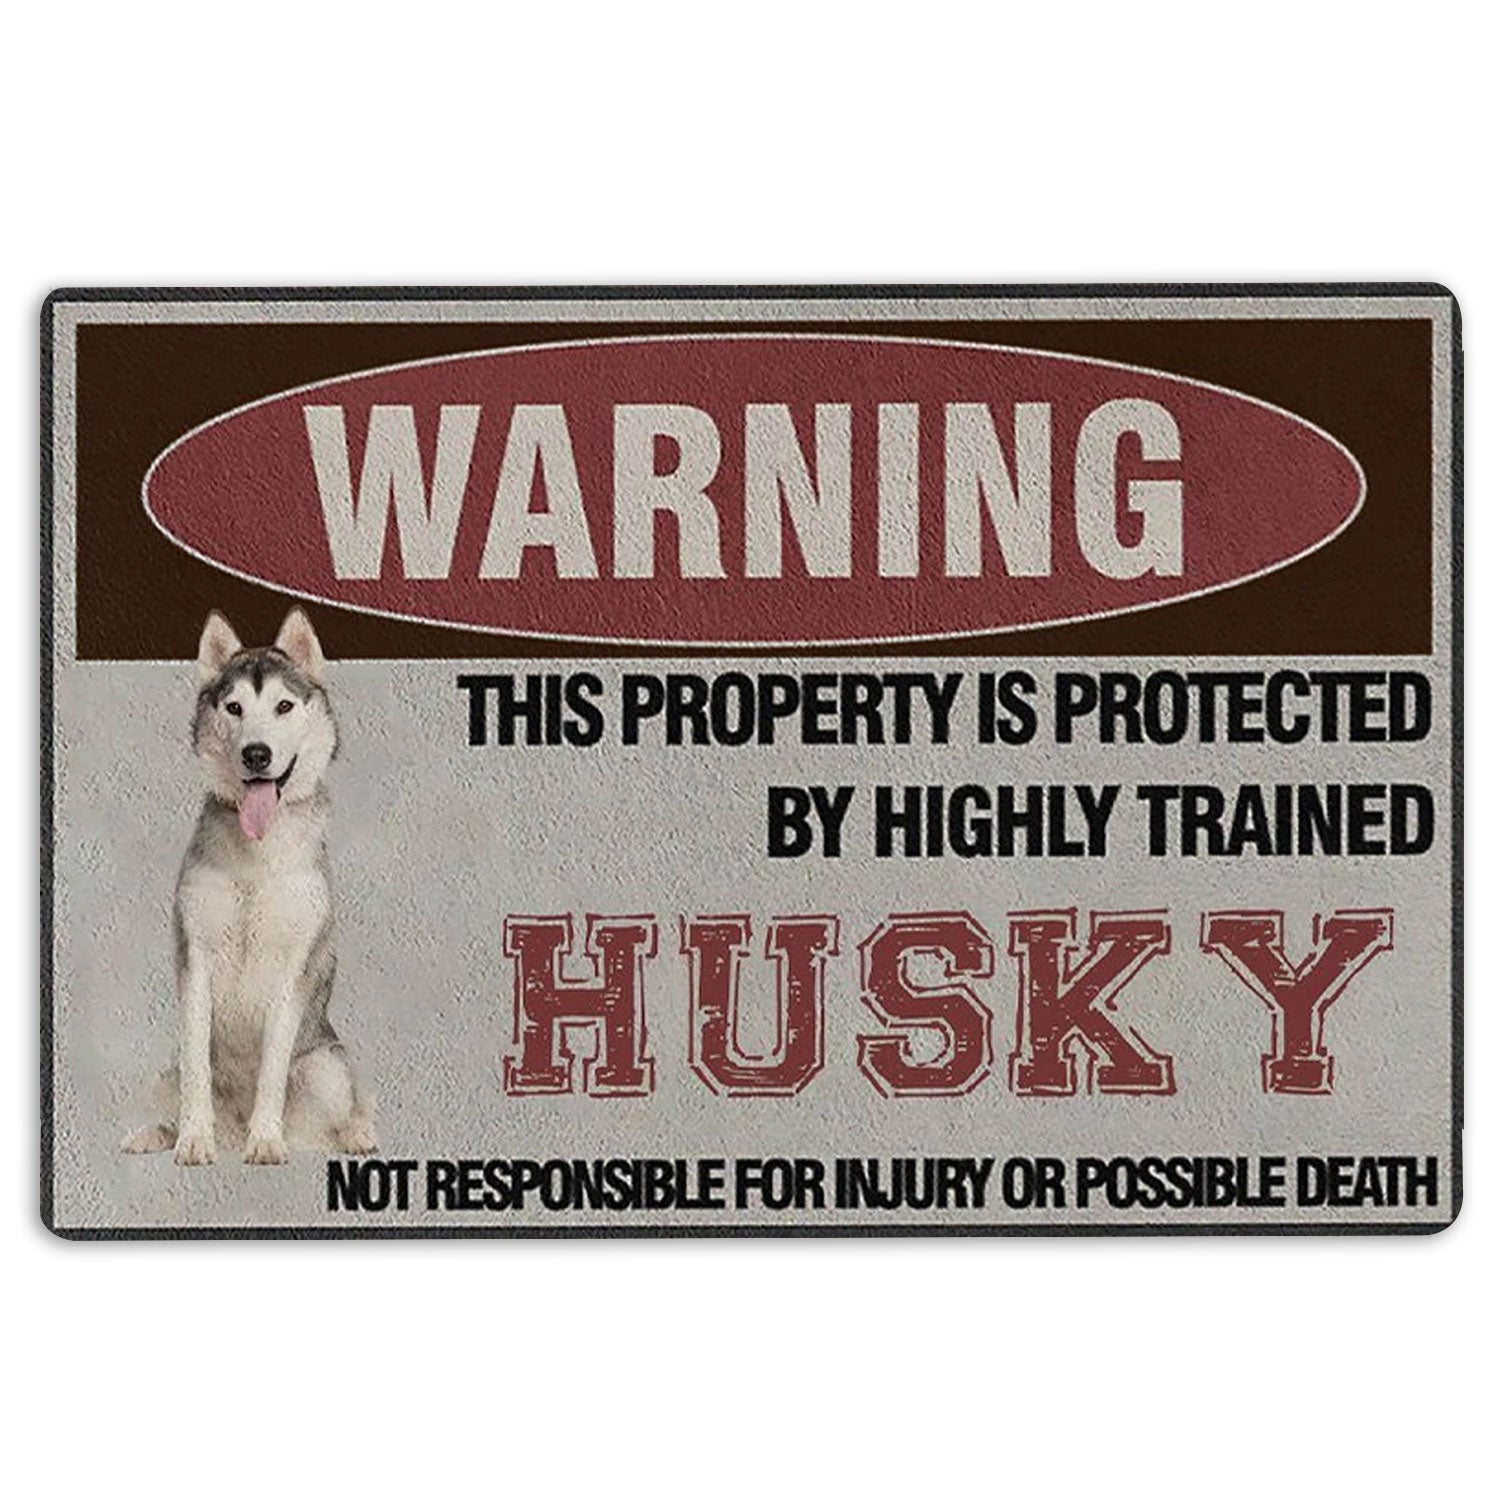 Ohaprints-Doormat-Outdoor-Indoor-Warning-This-Property-Is-Protected-By-A-Highly-Trained-Husky-Dog-Rubber-Door-Mat-1347-18'' x 30''